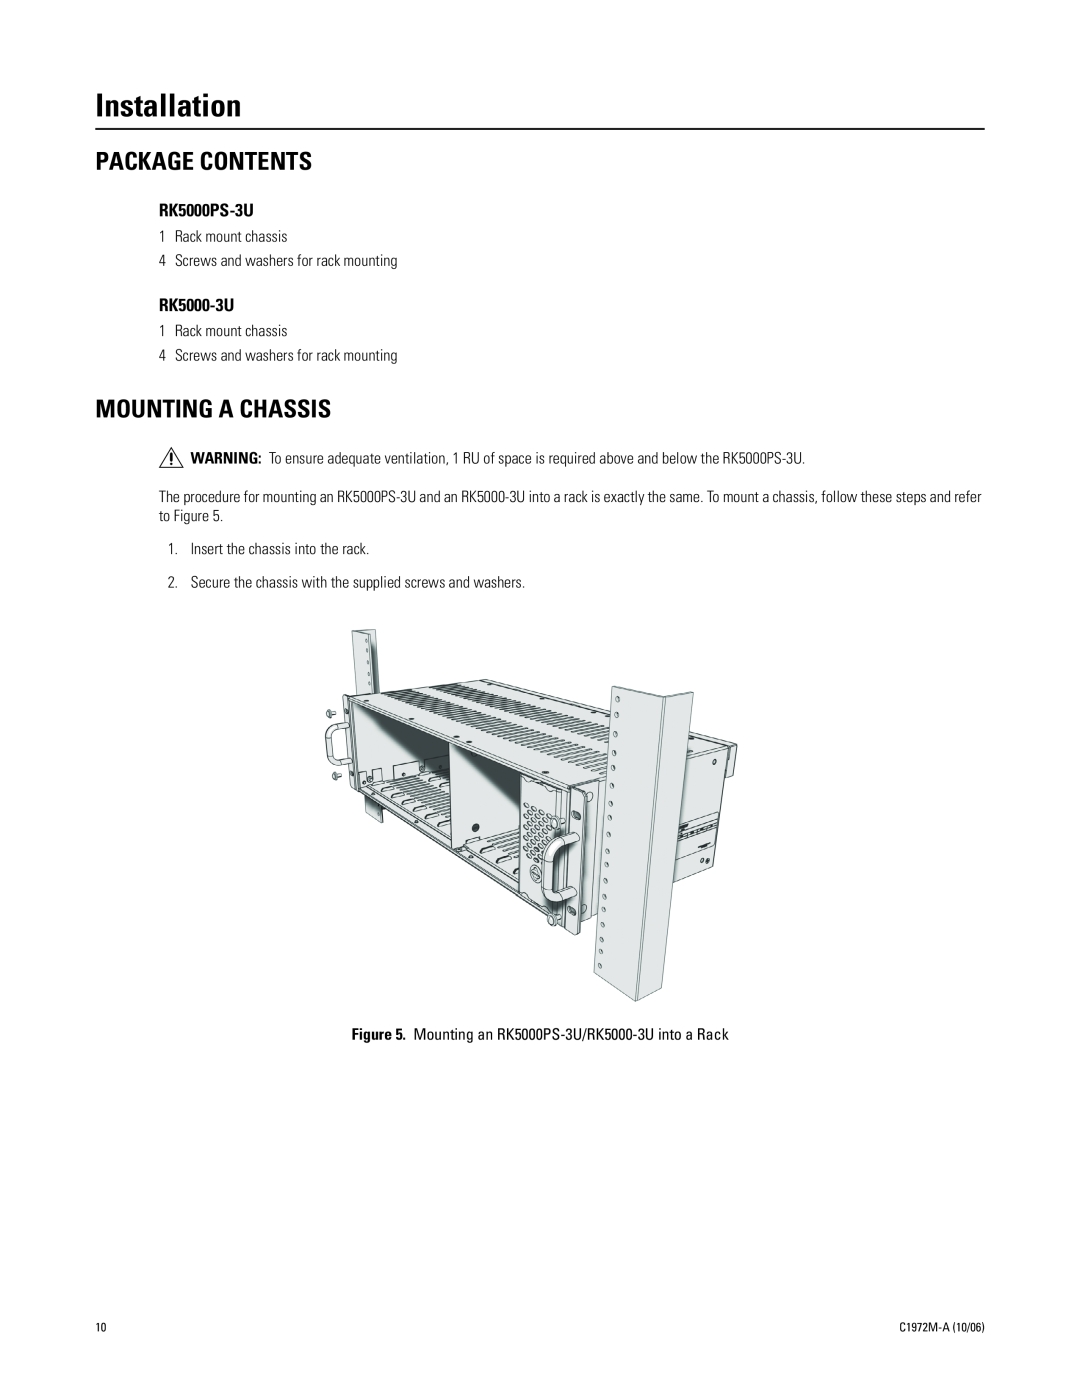 Pelco RK5000-3U manual Installation, Package Contents, Mounting A Chassis, RK5000PS-3U 